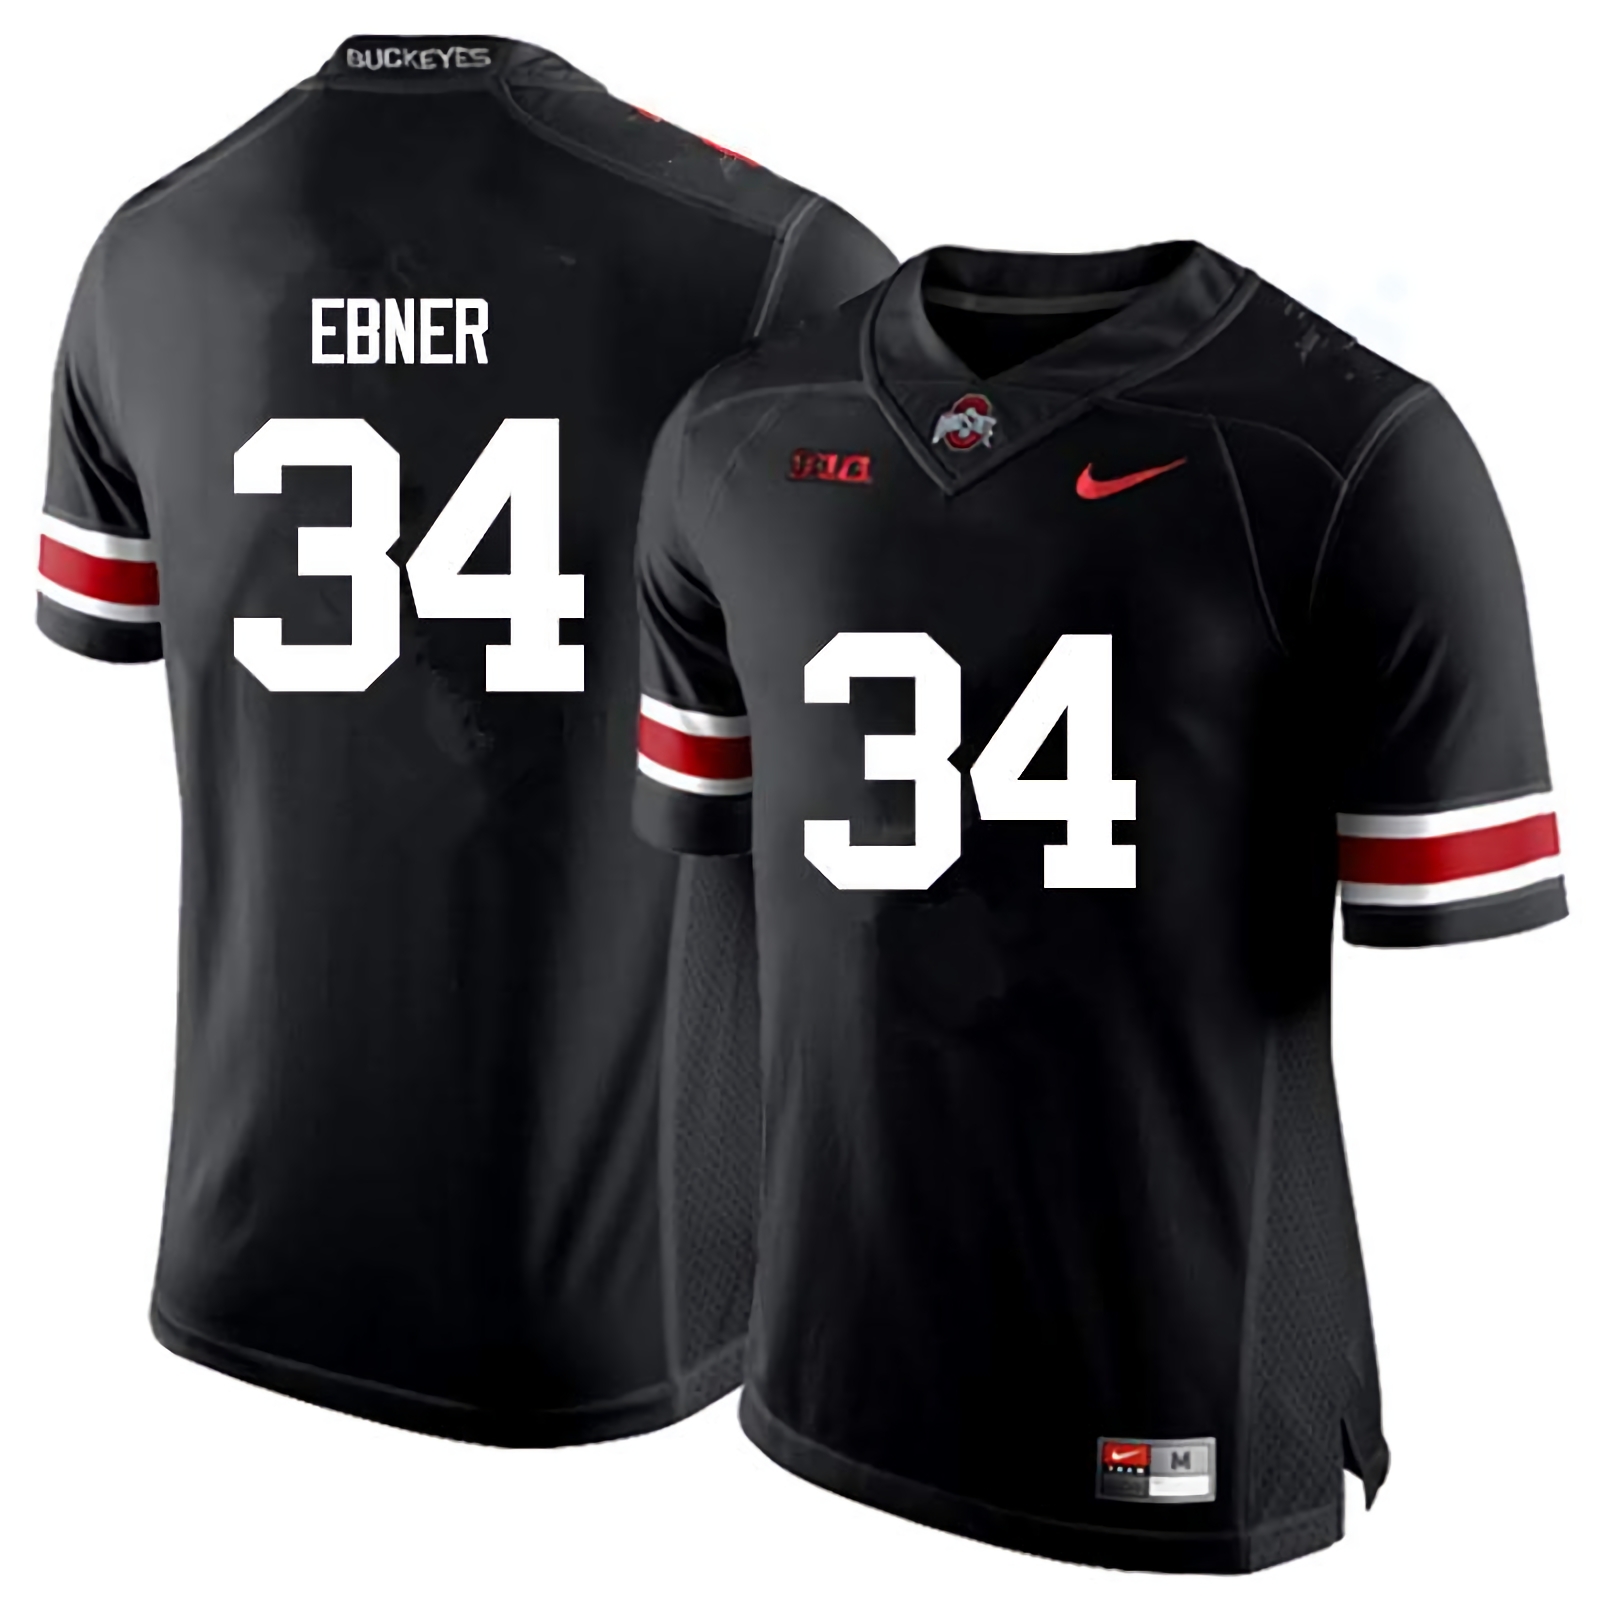 Nate Ebner Ohio State Buckeyes Men's NCAA #34 Nike Black College Stitched Football Jersey IHF4256SY